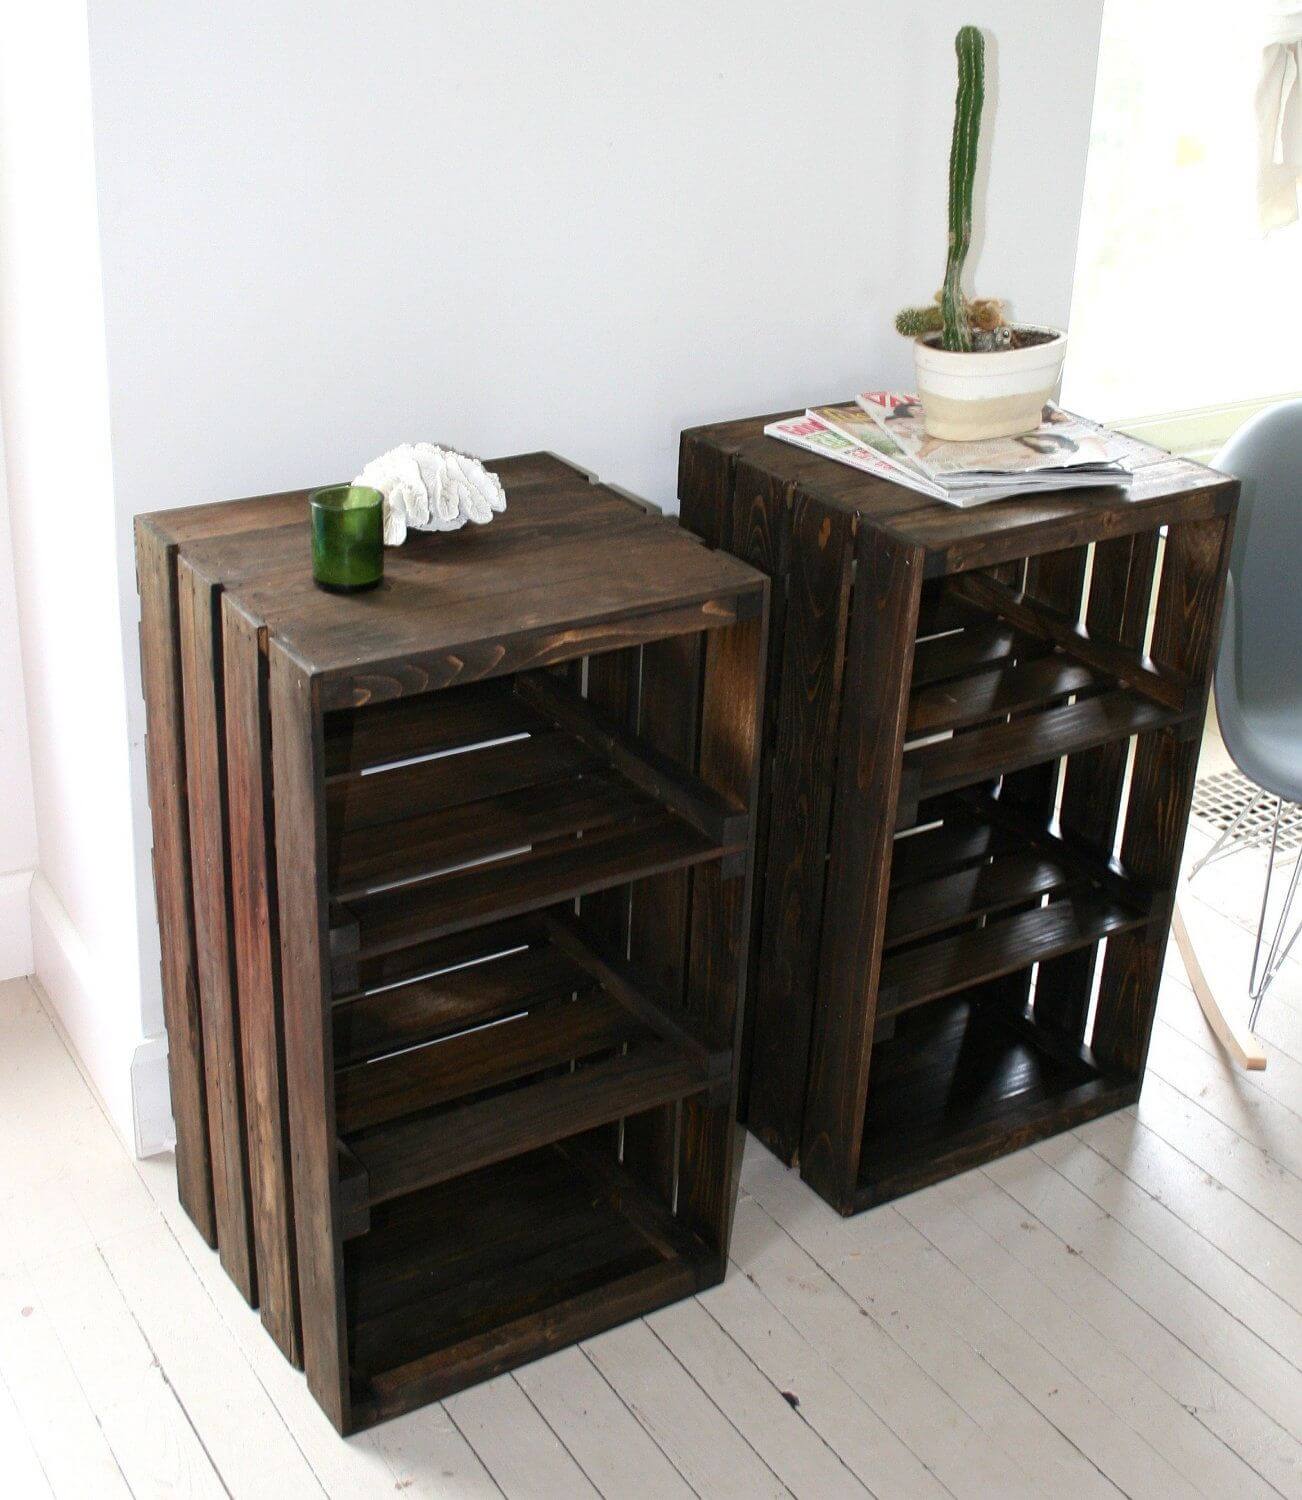 20 Diy Wood Crate Furniture Ideas And Projects For